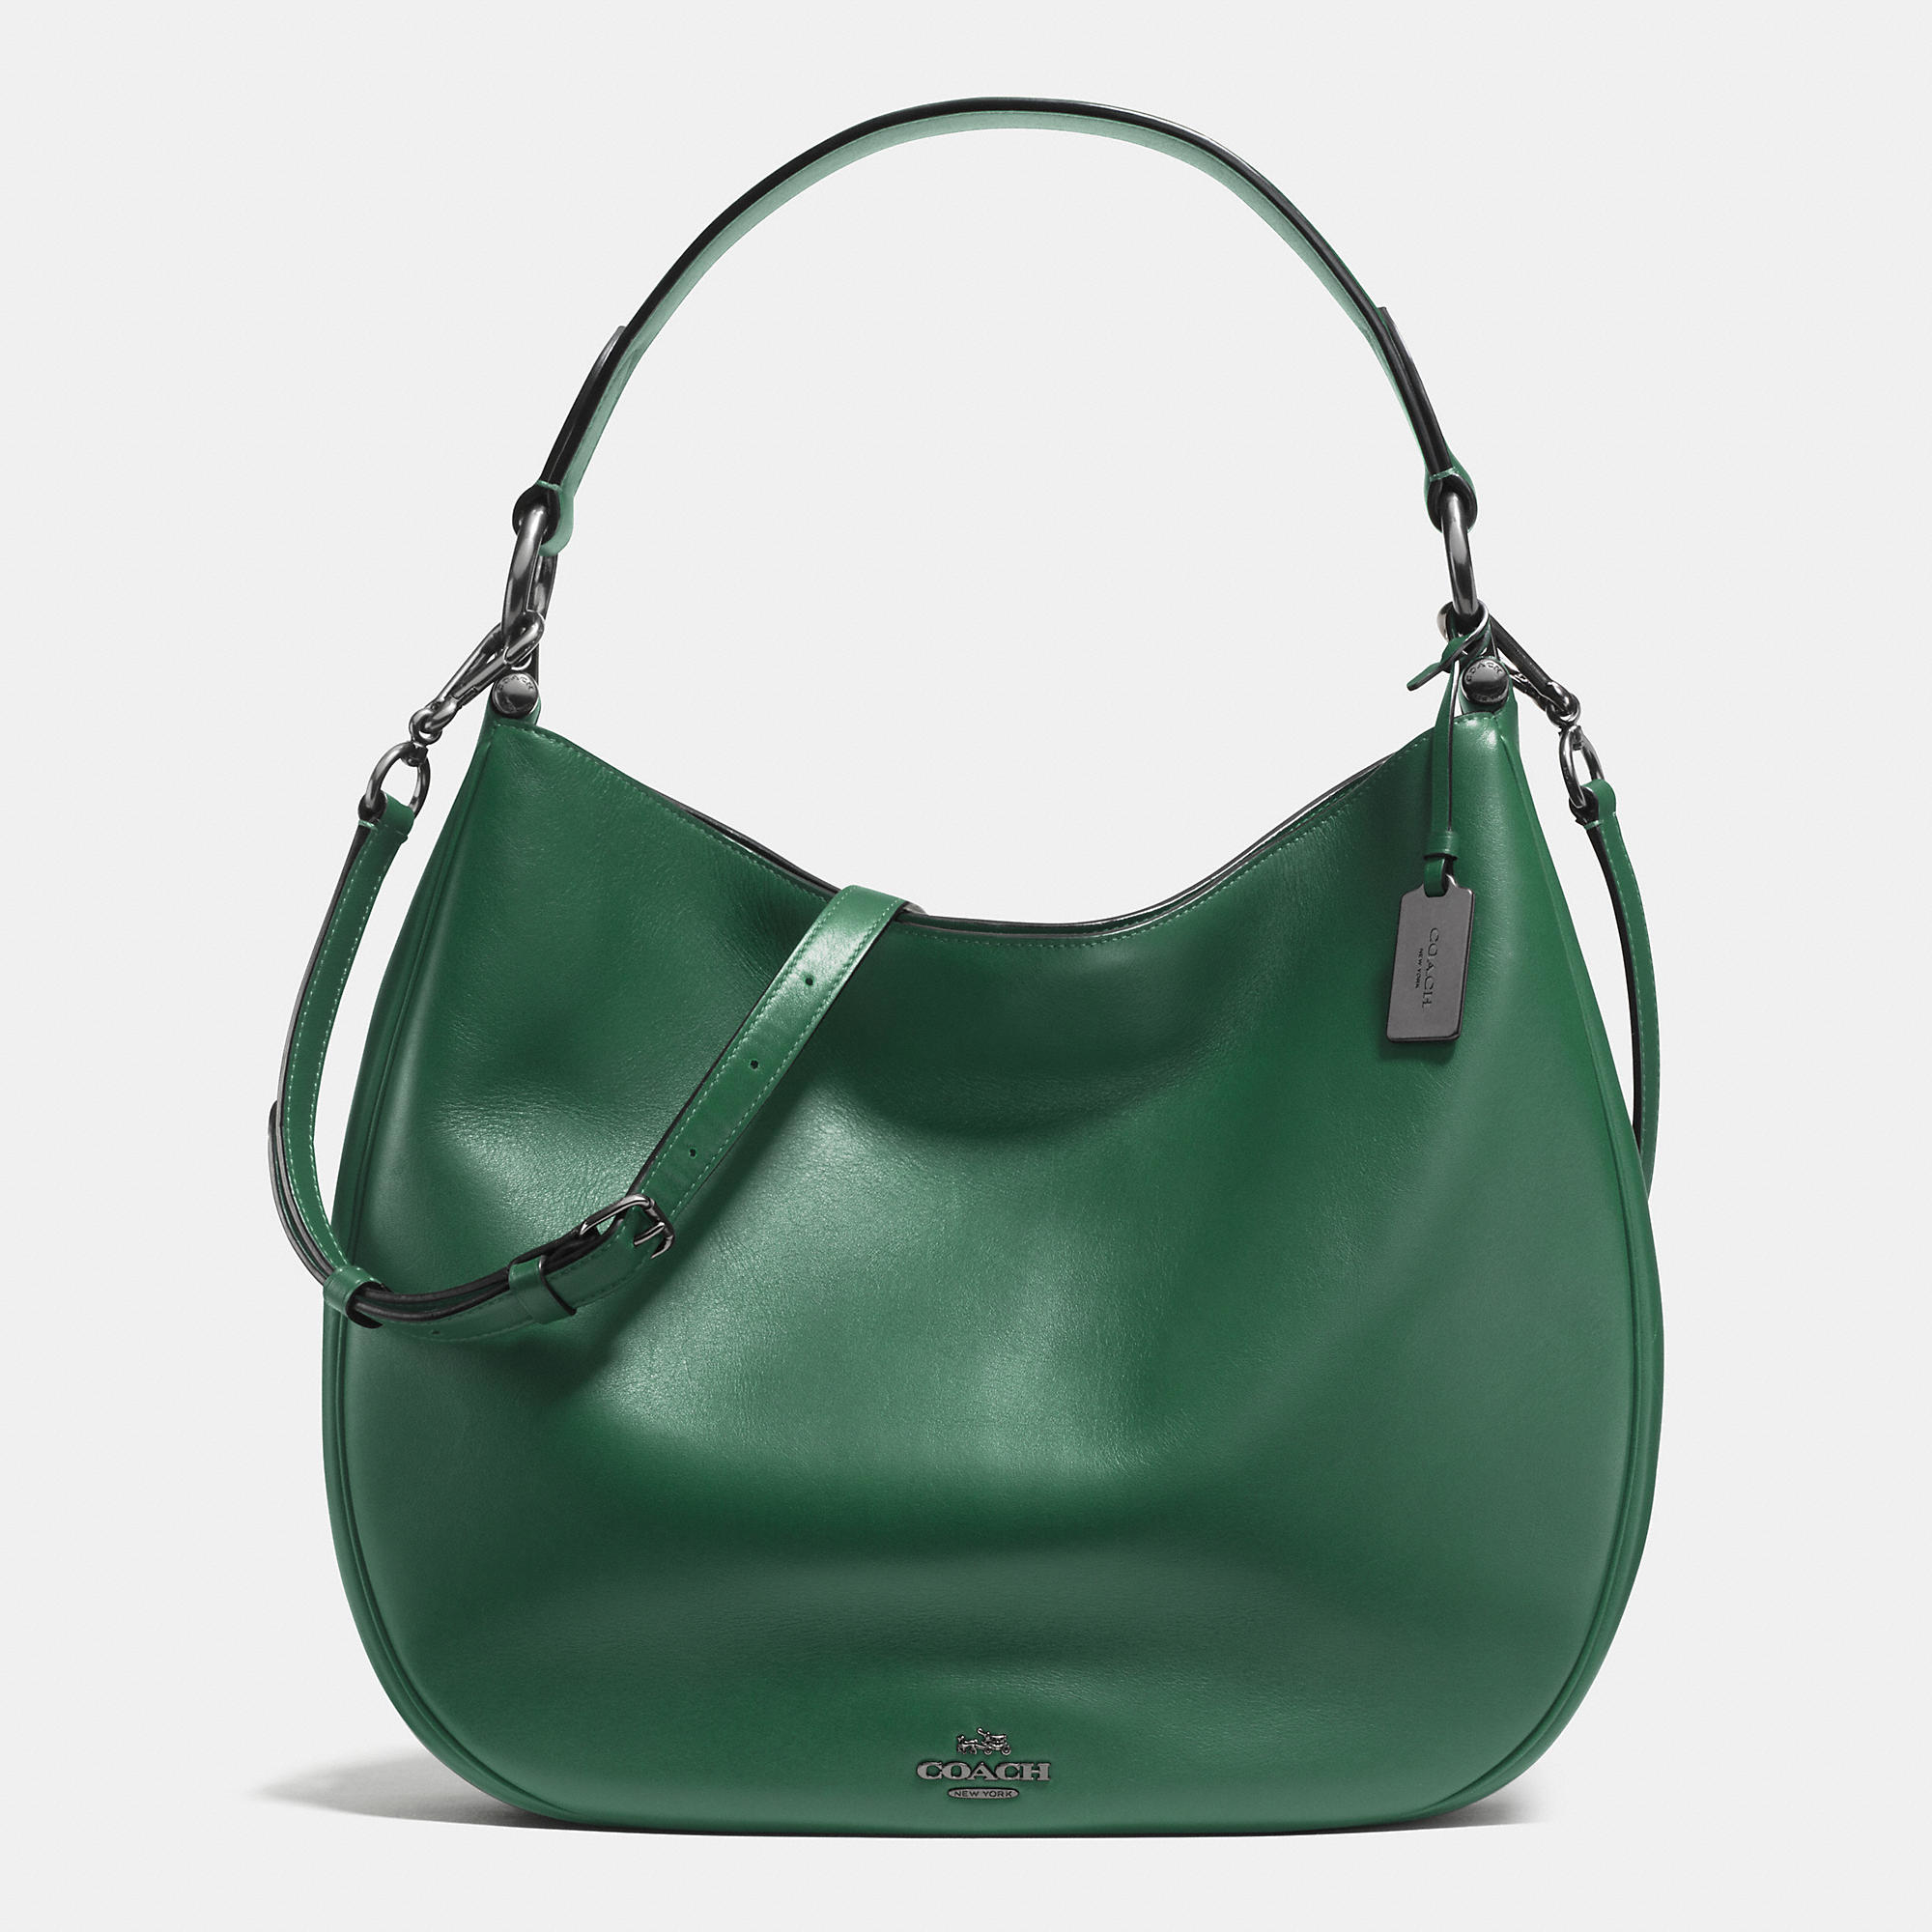 Lyst - Coach Nomad Hobo In Glovetanned Leather in Green2000 x 2000